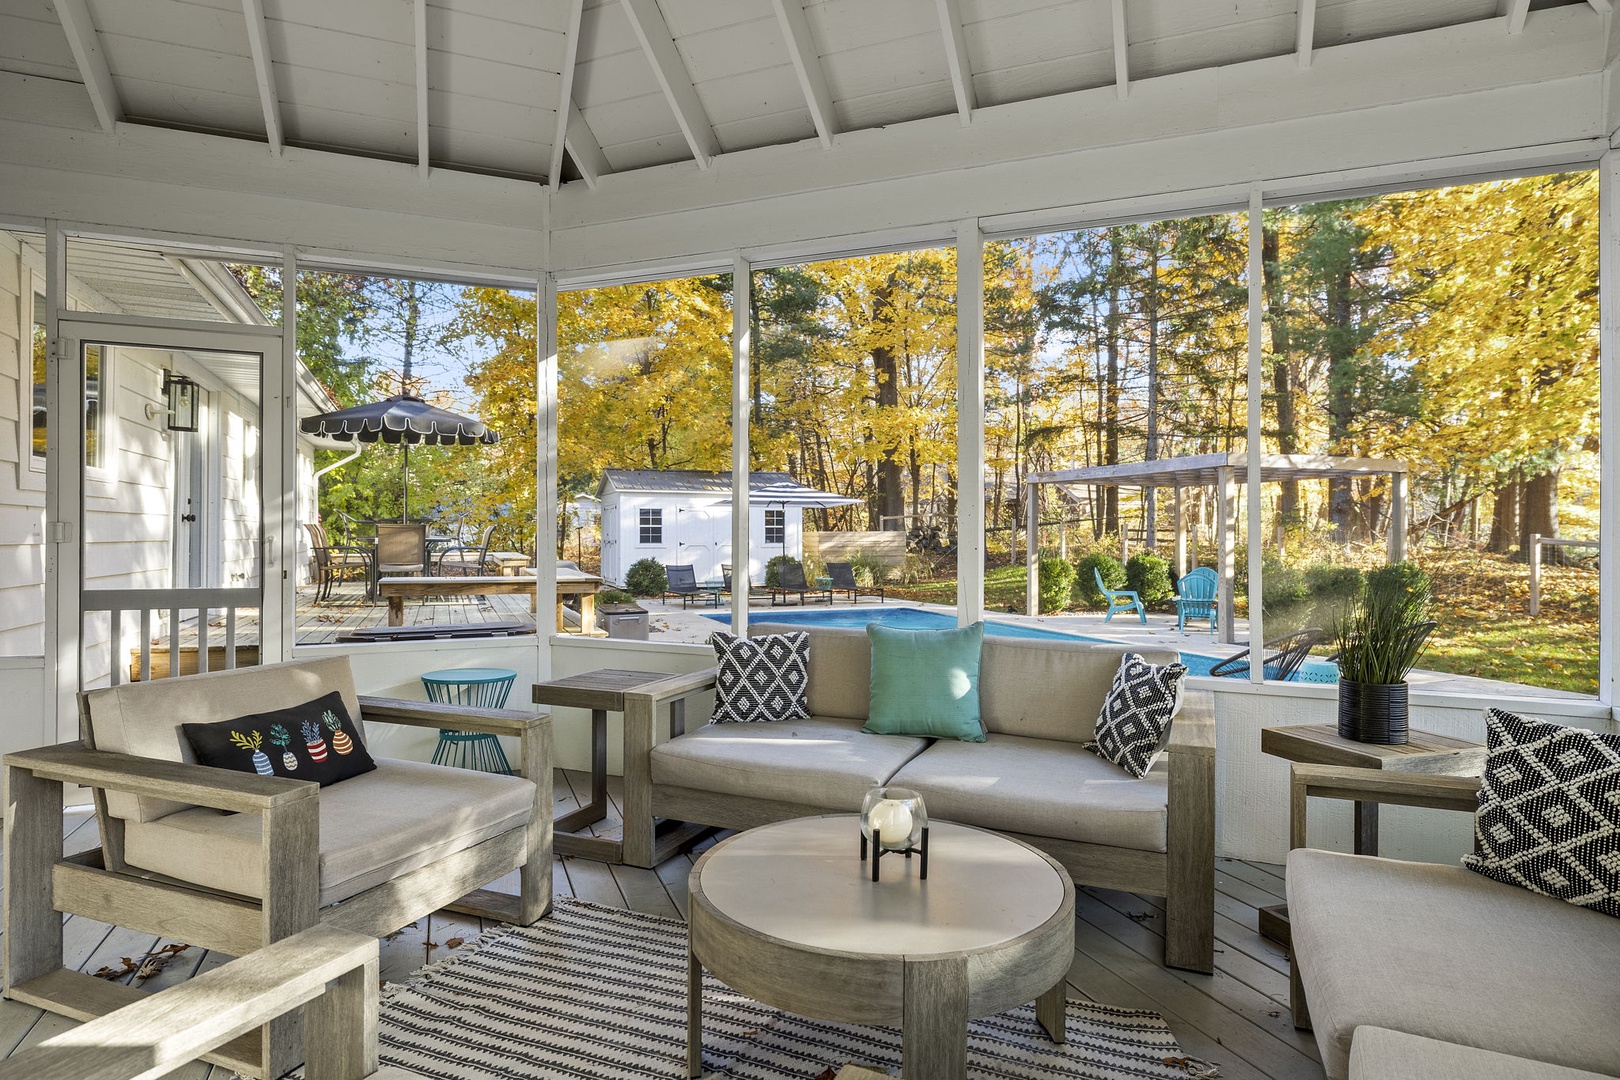 Enjoy some down-time in the super-comfy screened-in back porch.